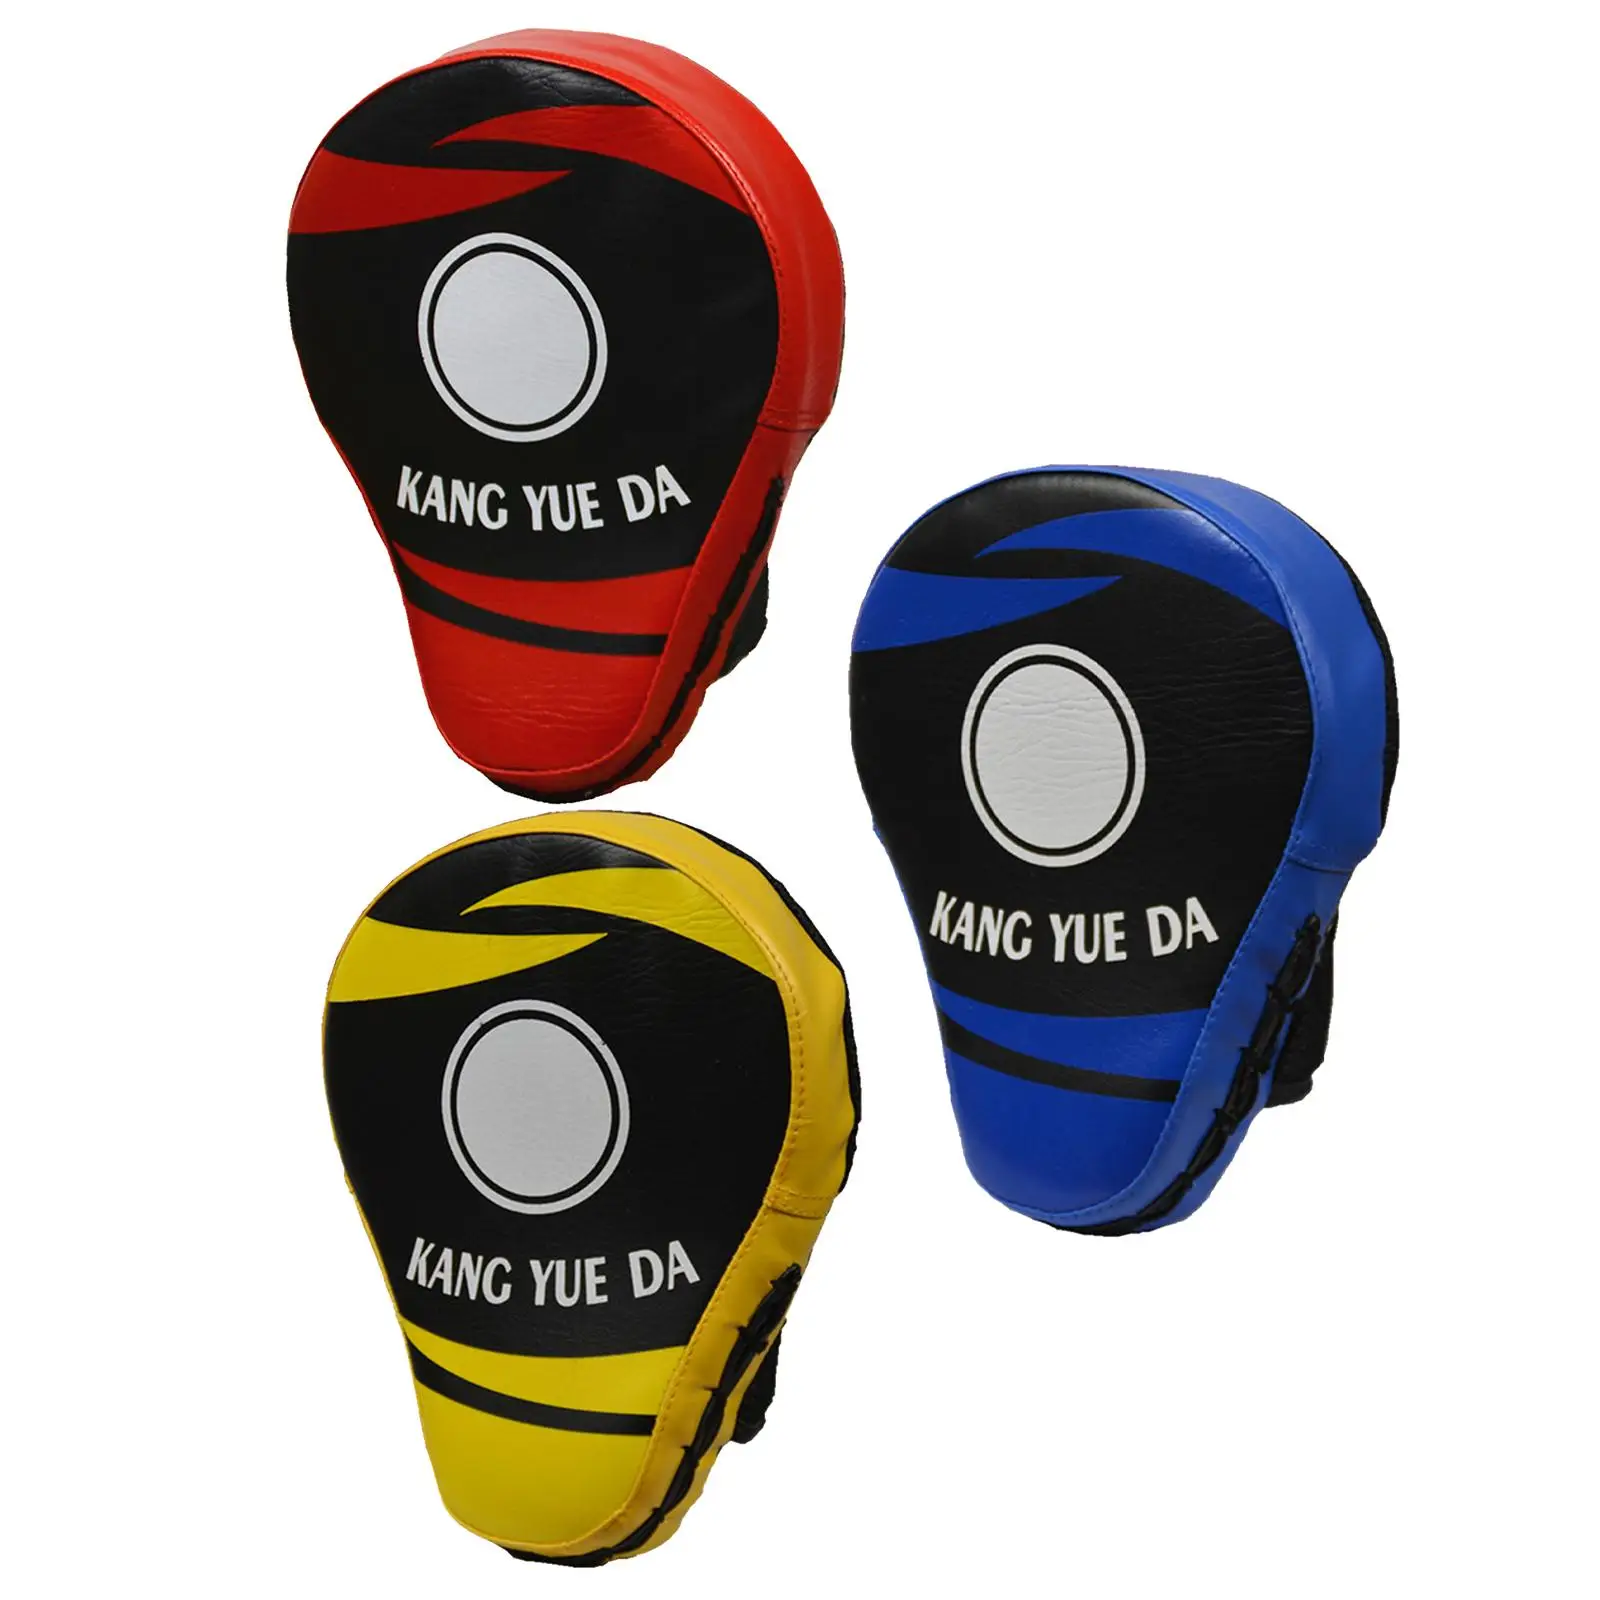 PU Lether Kick Shield Strike Pd Focus Pds Trining Shield Hnd Trget Pd Equipment for Mm Kickboxing Snd Thi Prcticing